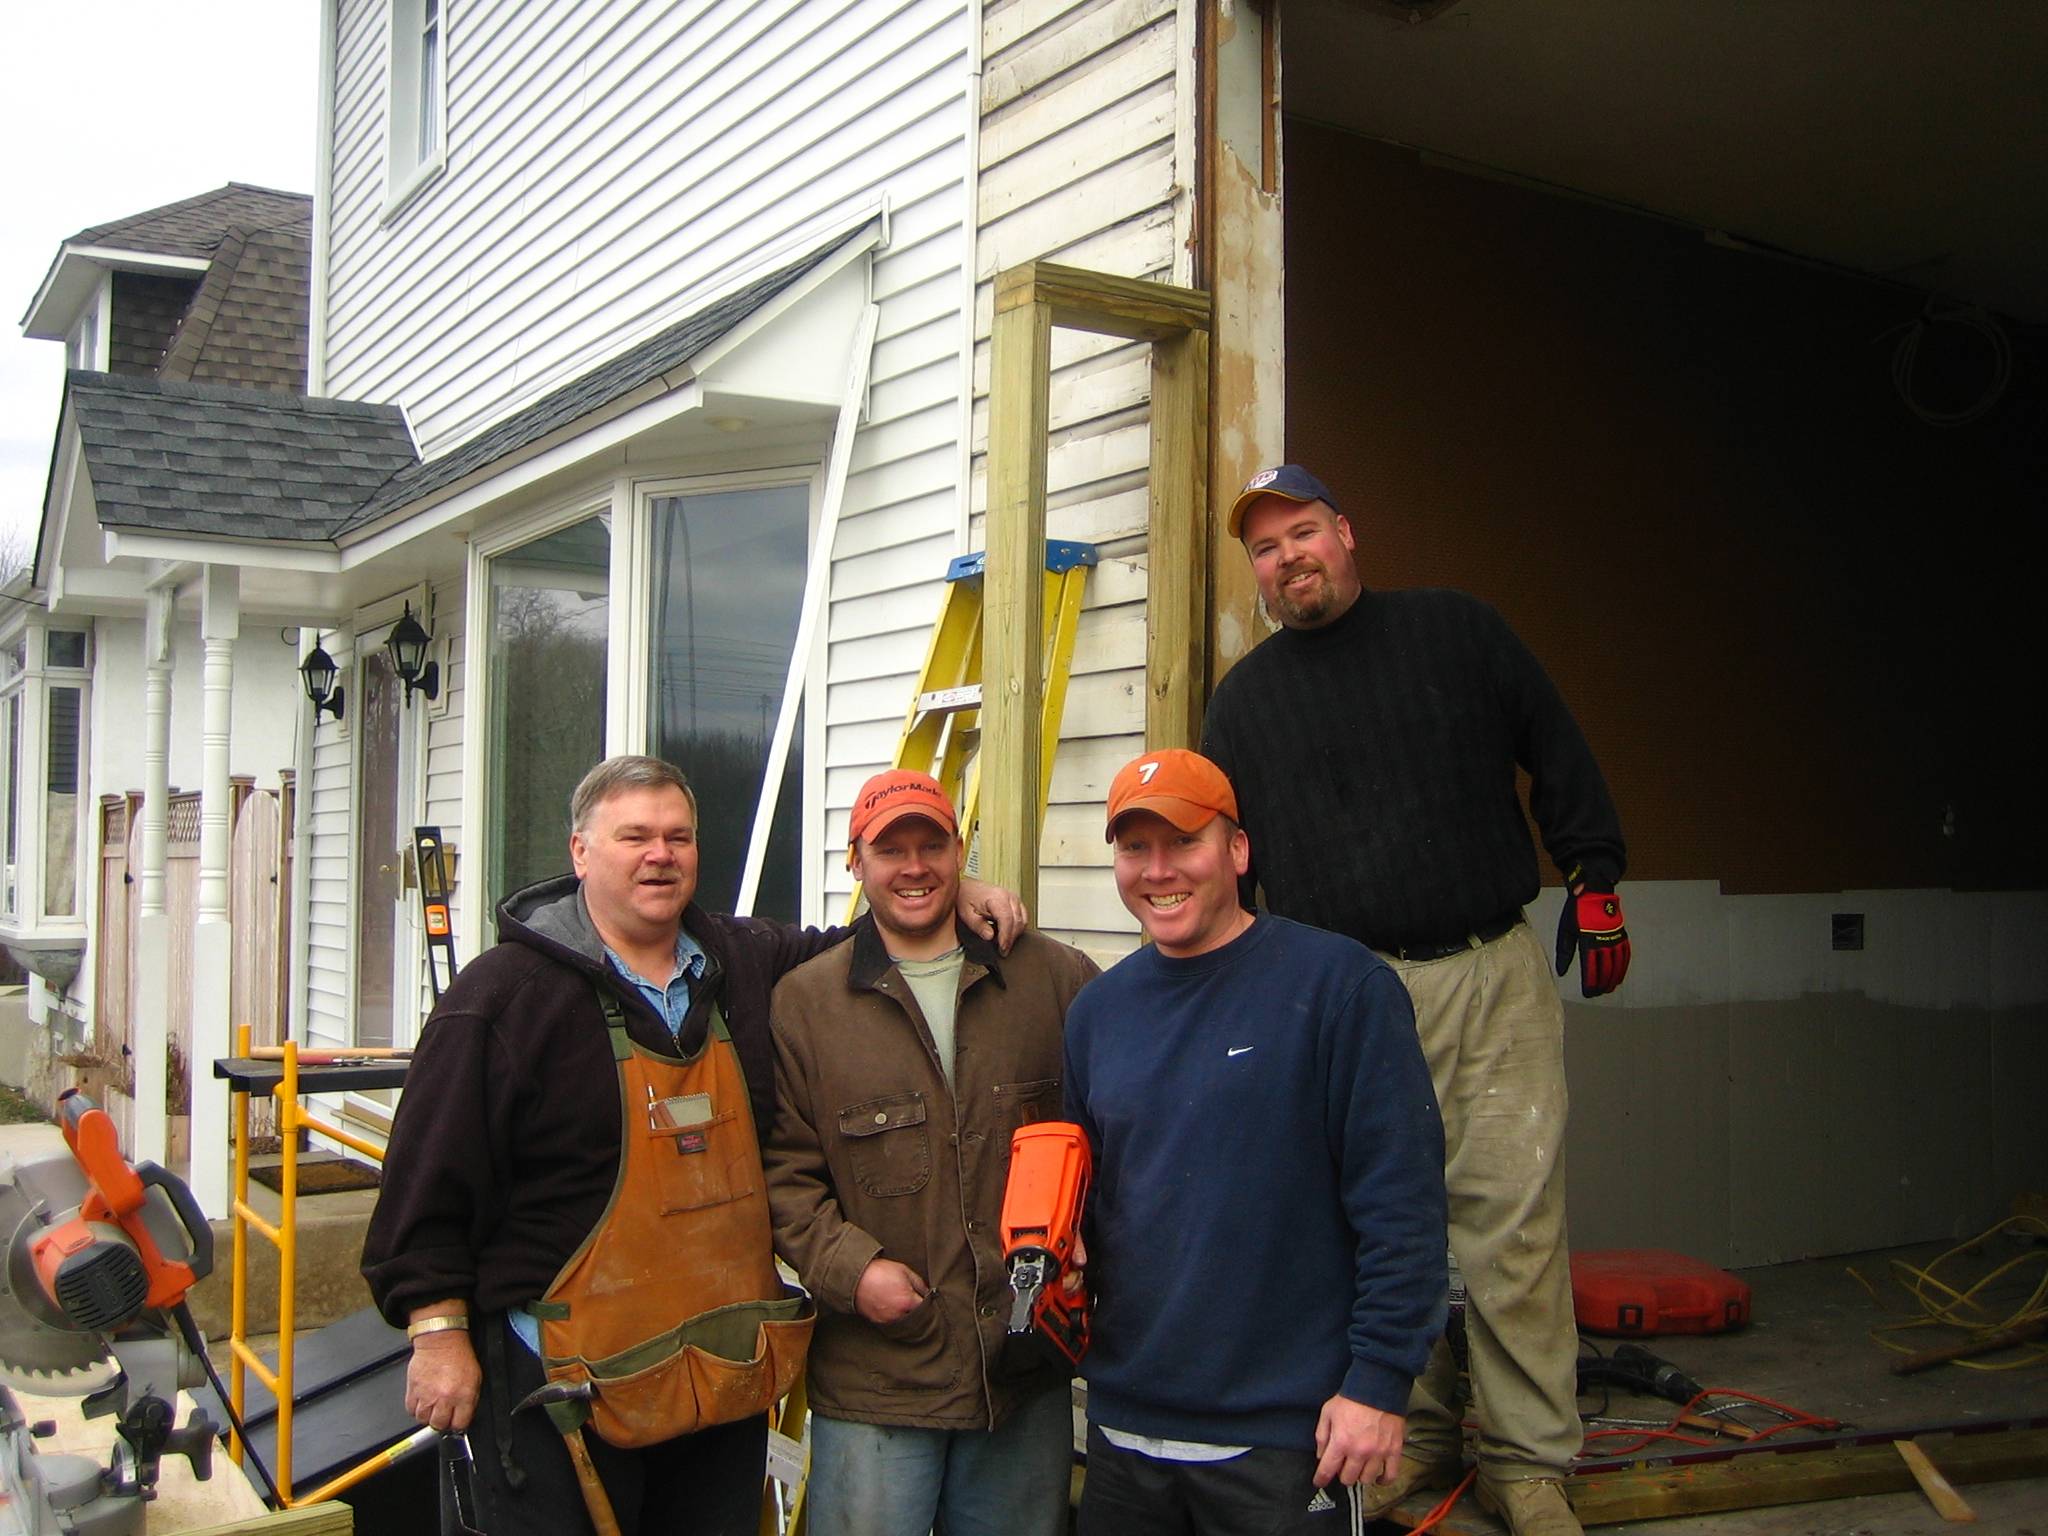 Four men standing in front of a house.